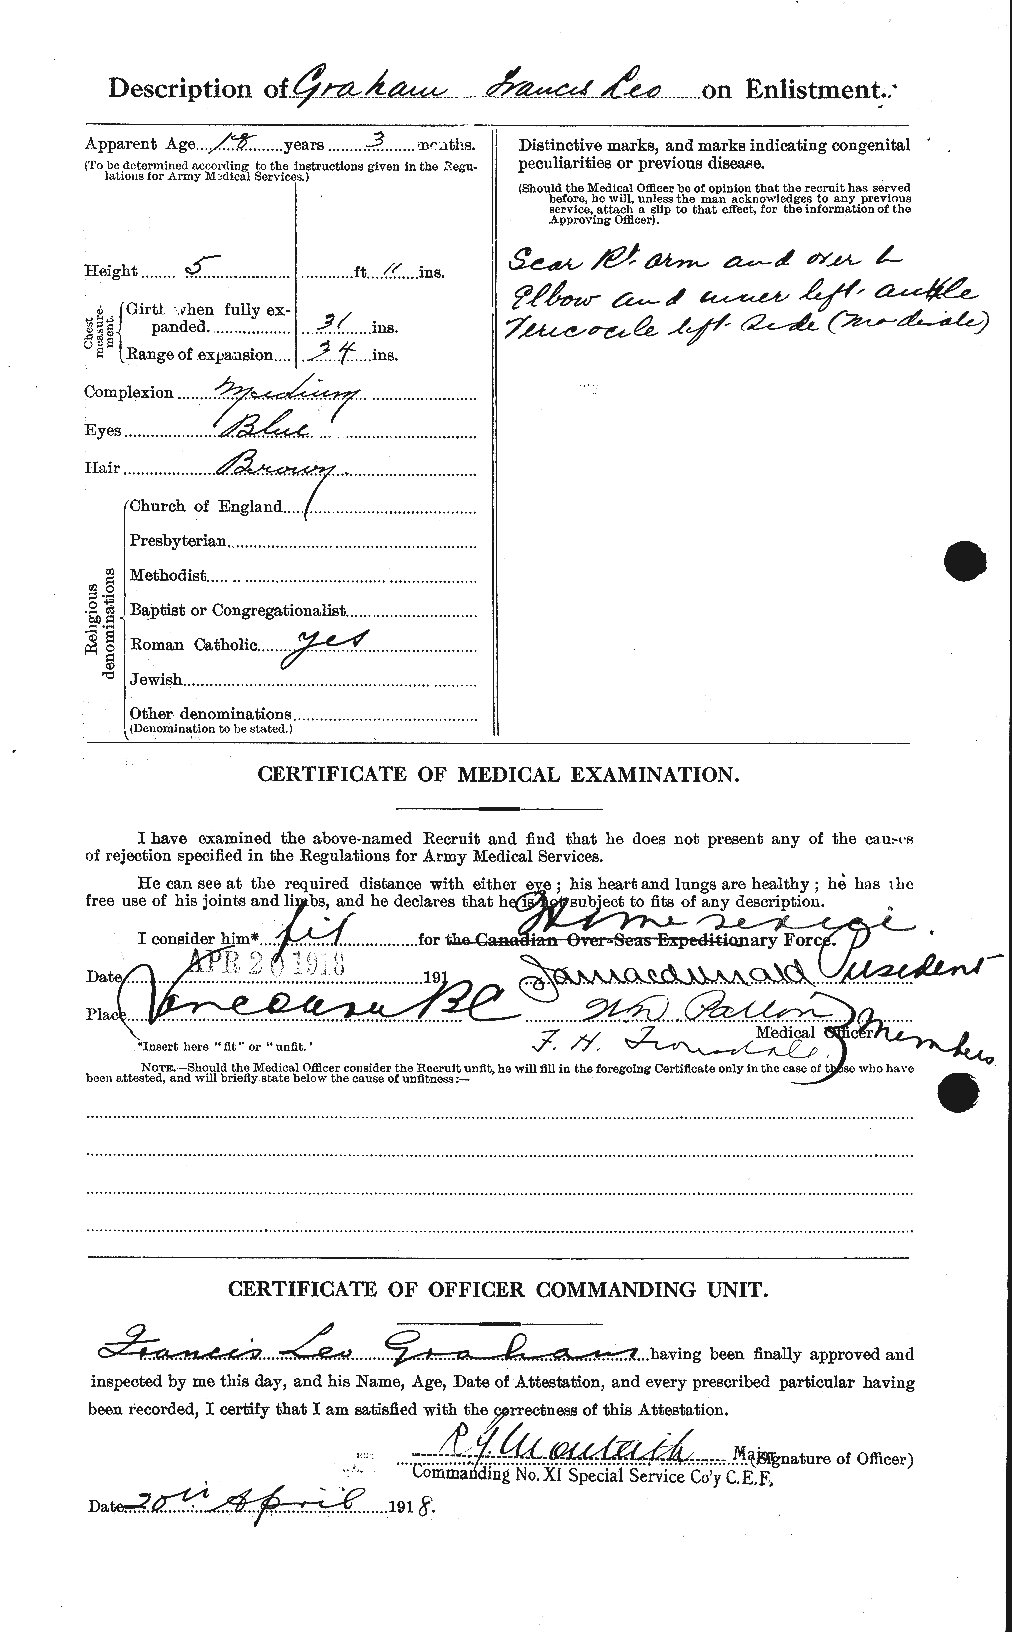 Personnel Records of the First World War - CEF 357579b